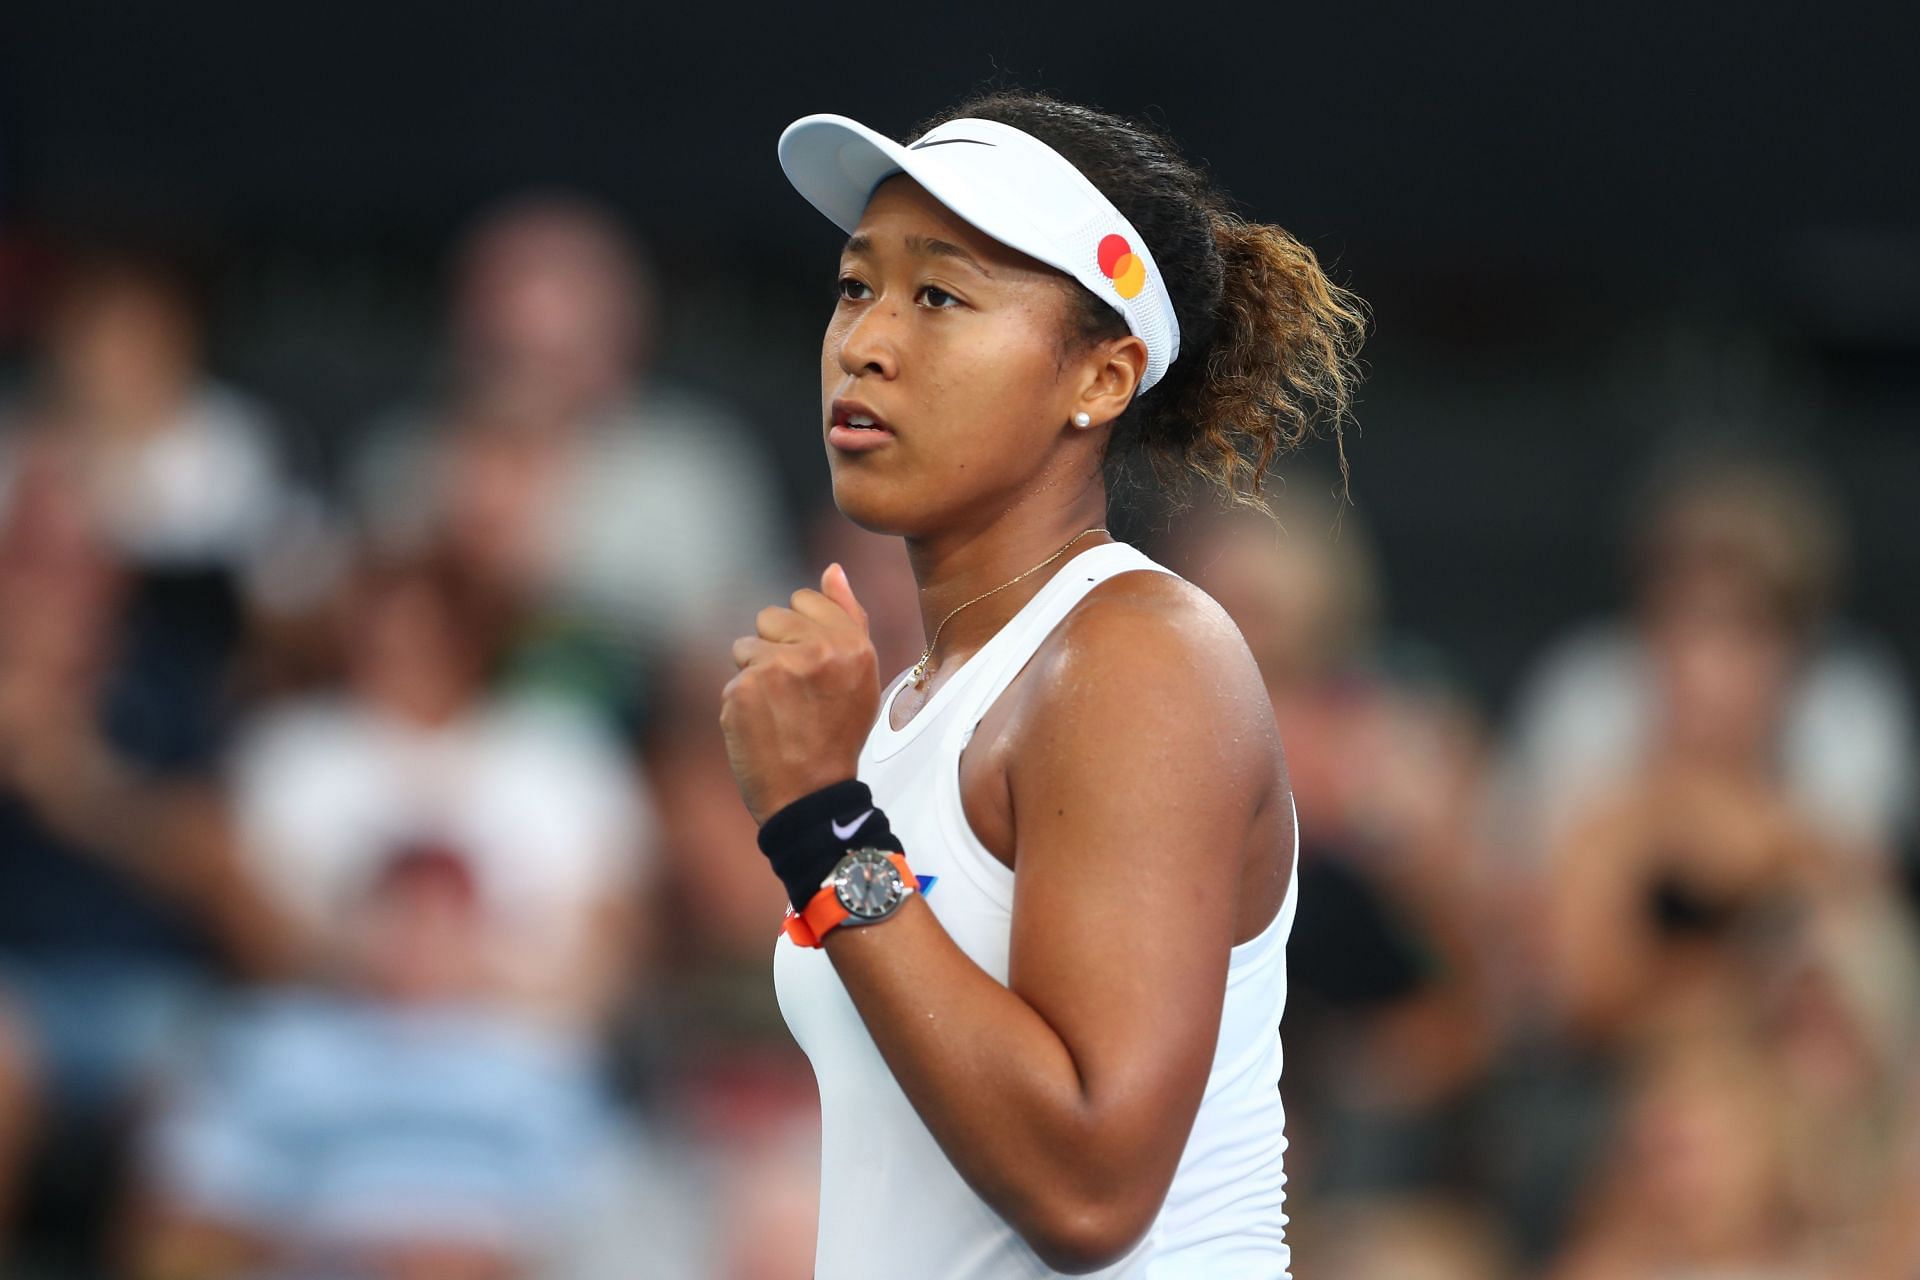 Jim Courier hopes Naomi Osaka can find the right &quot;work-life balance&quot; for herself